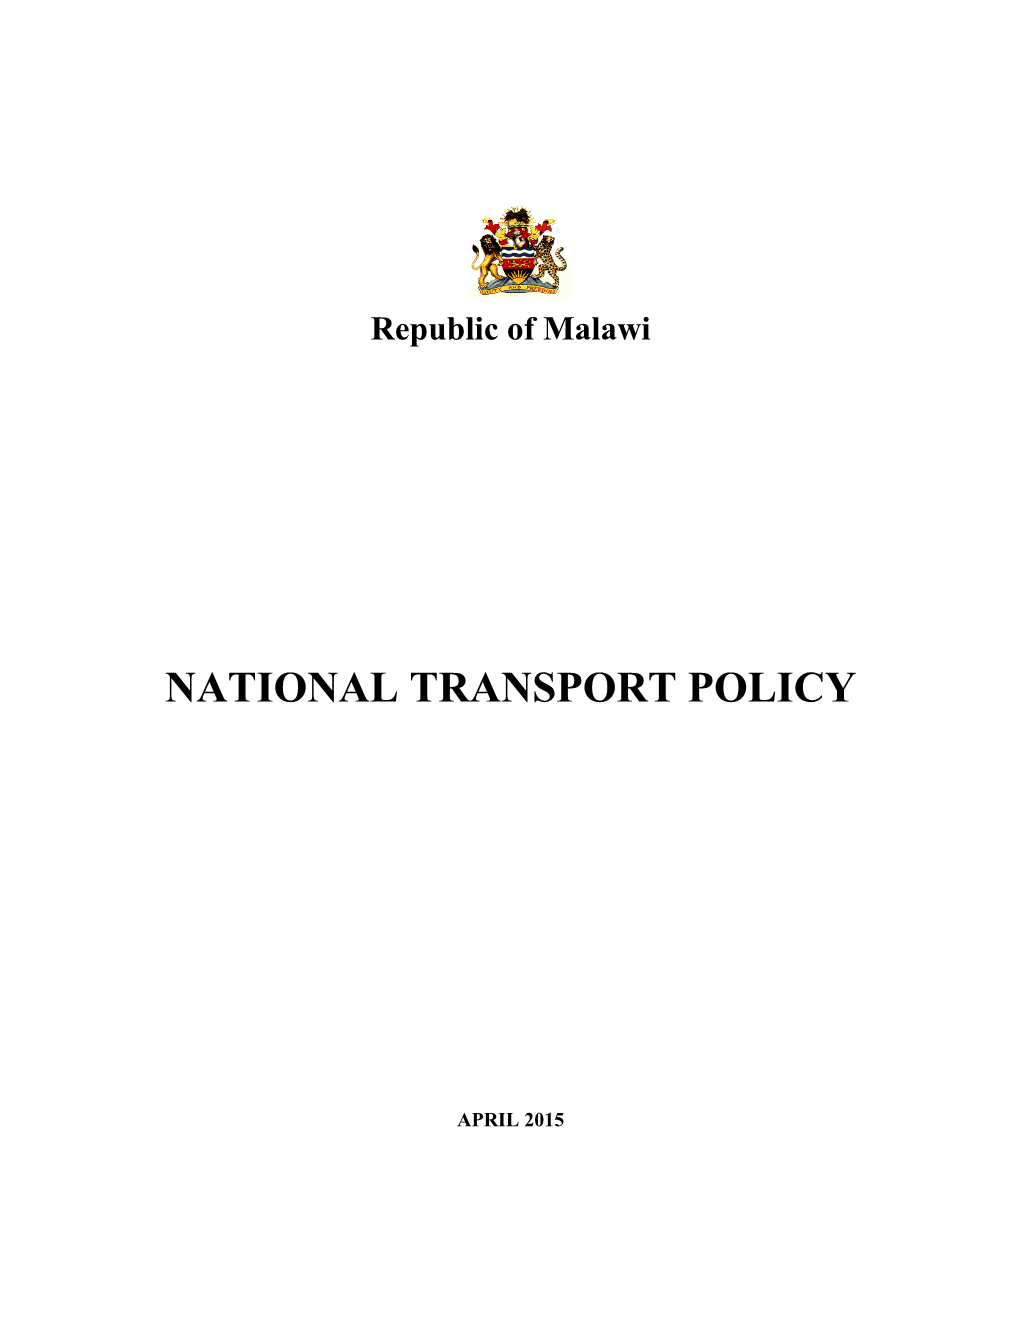 National Transport Policy